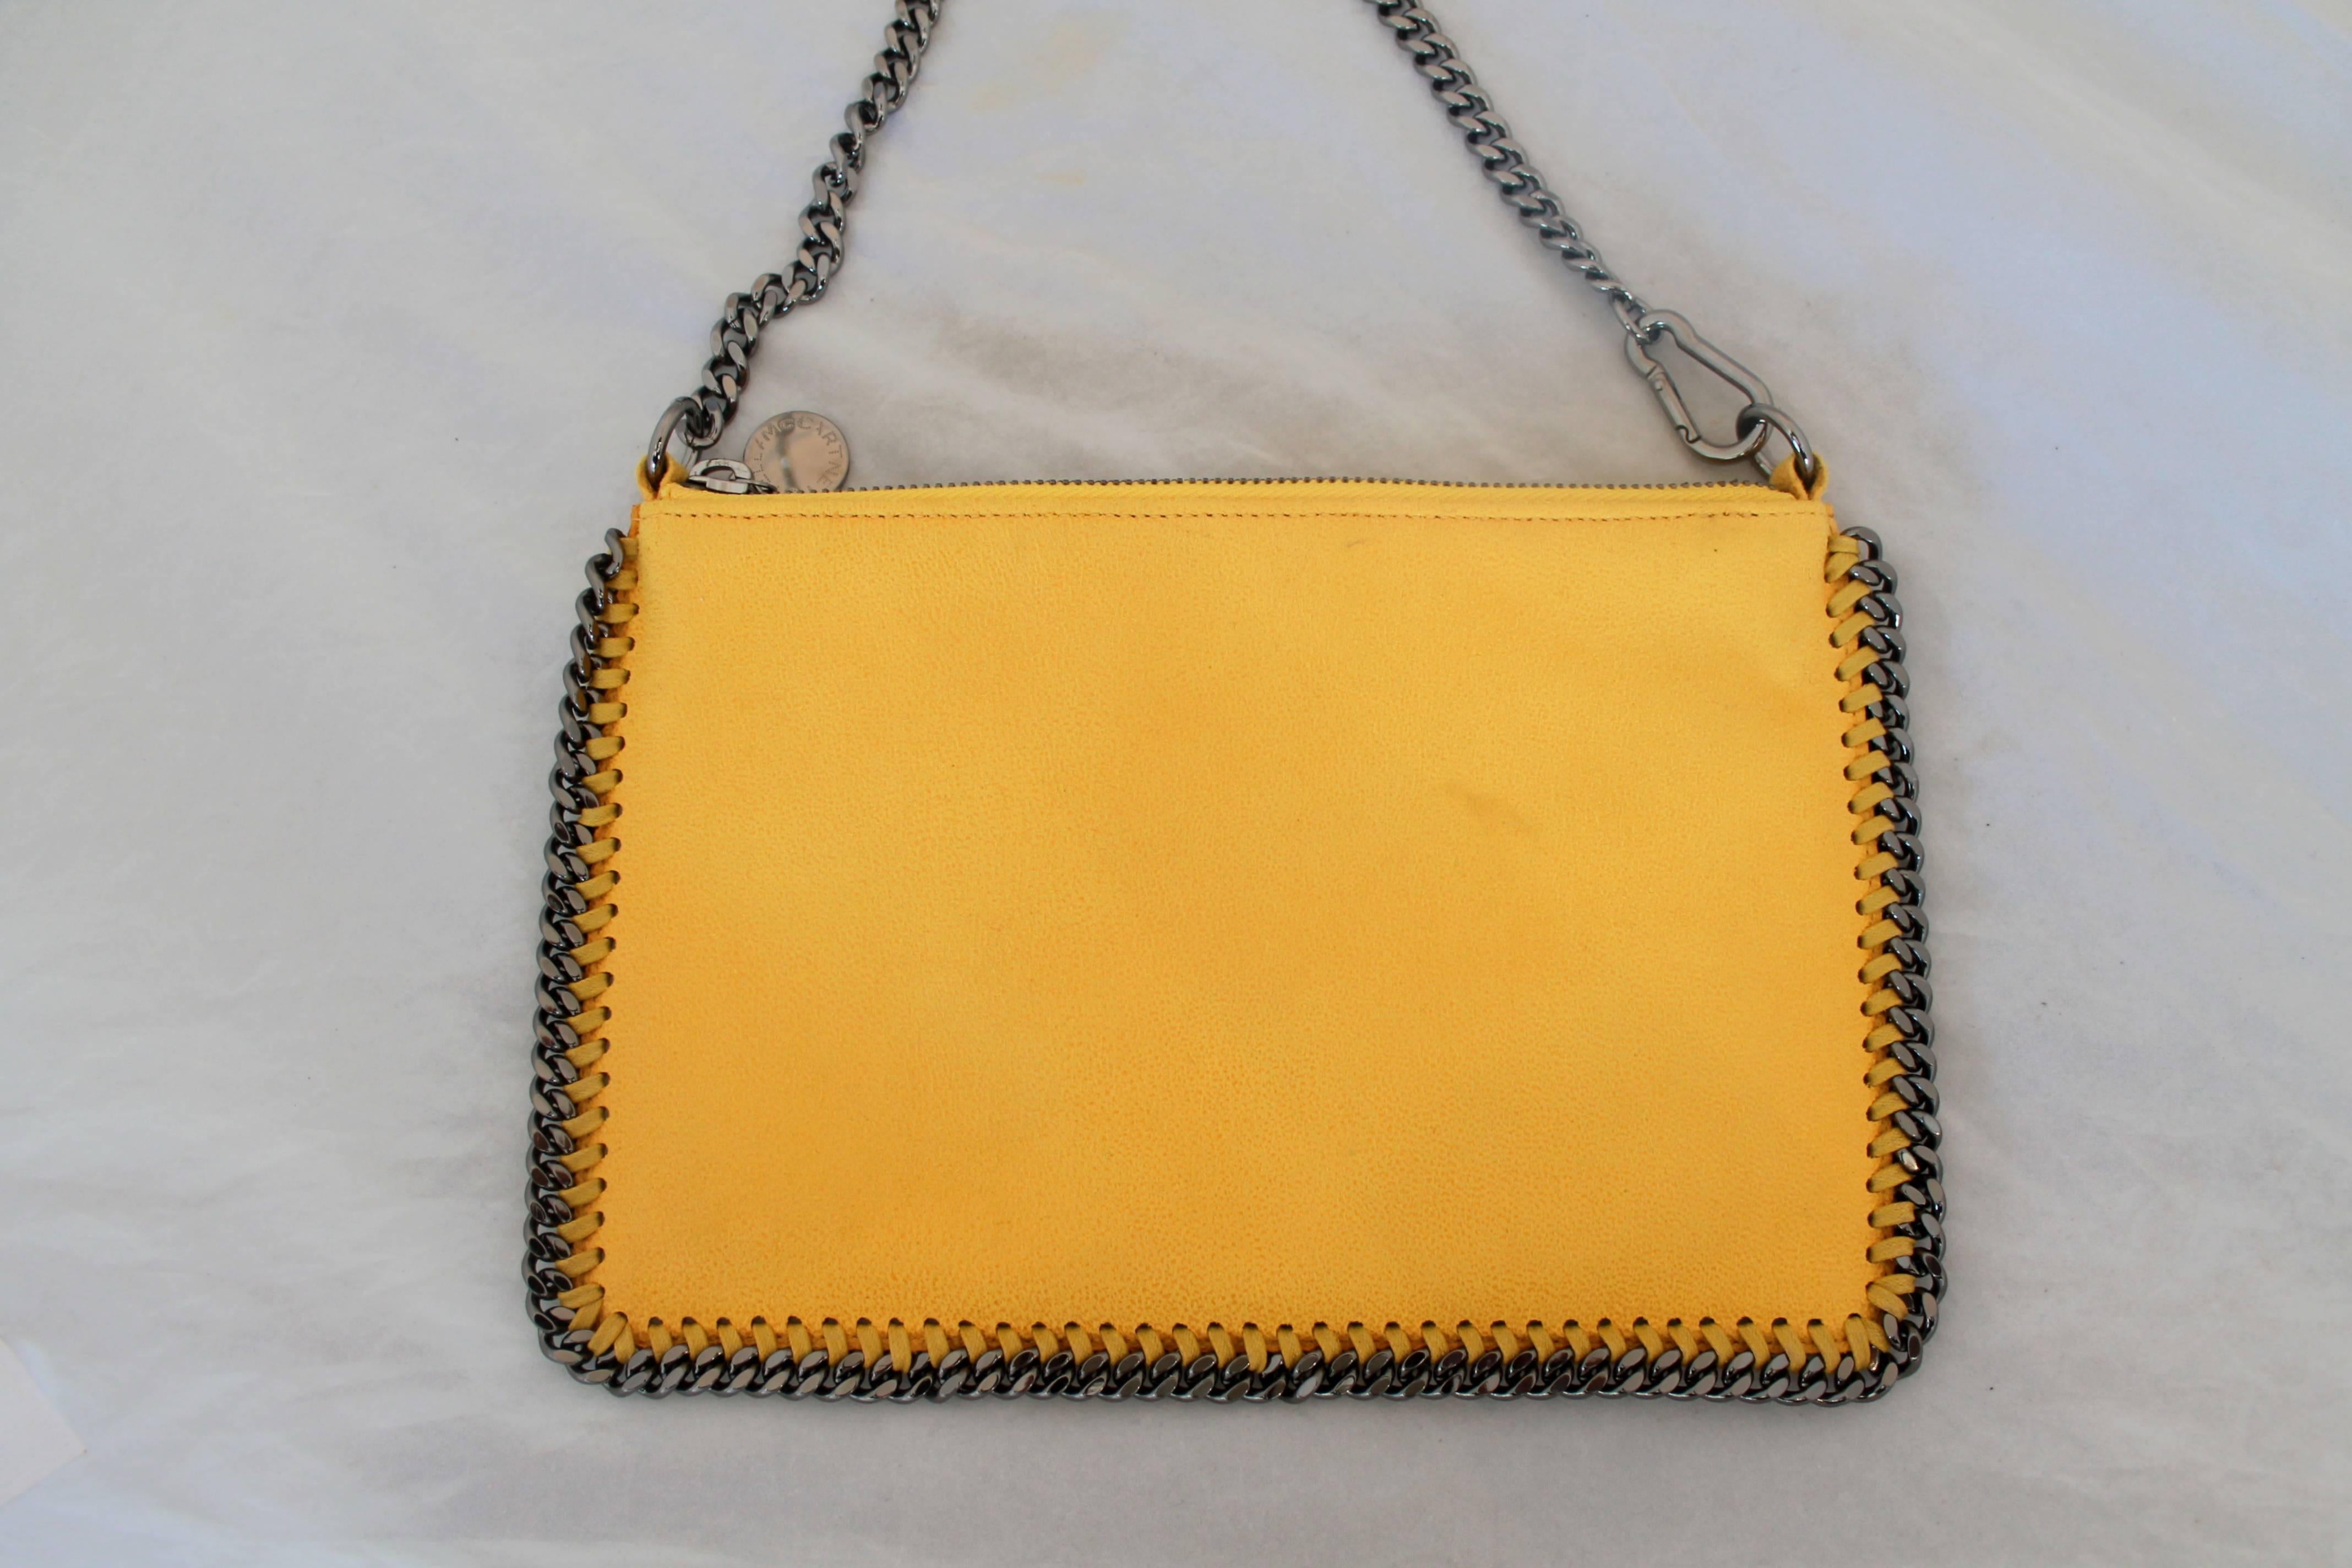 Stella McCartney Mustard Pouch w/ Chain Link Trim.  This beautiful bag is in excellent condition.  It features a chain link trim and strap with palladium hardware.  This pouch is vegetarian friendly, using recycled safari